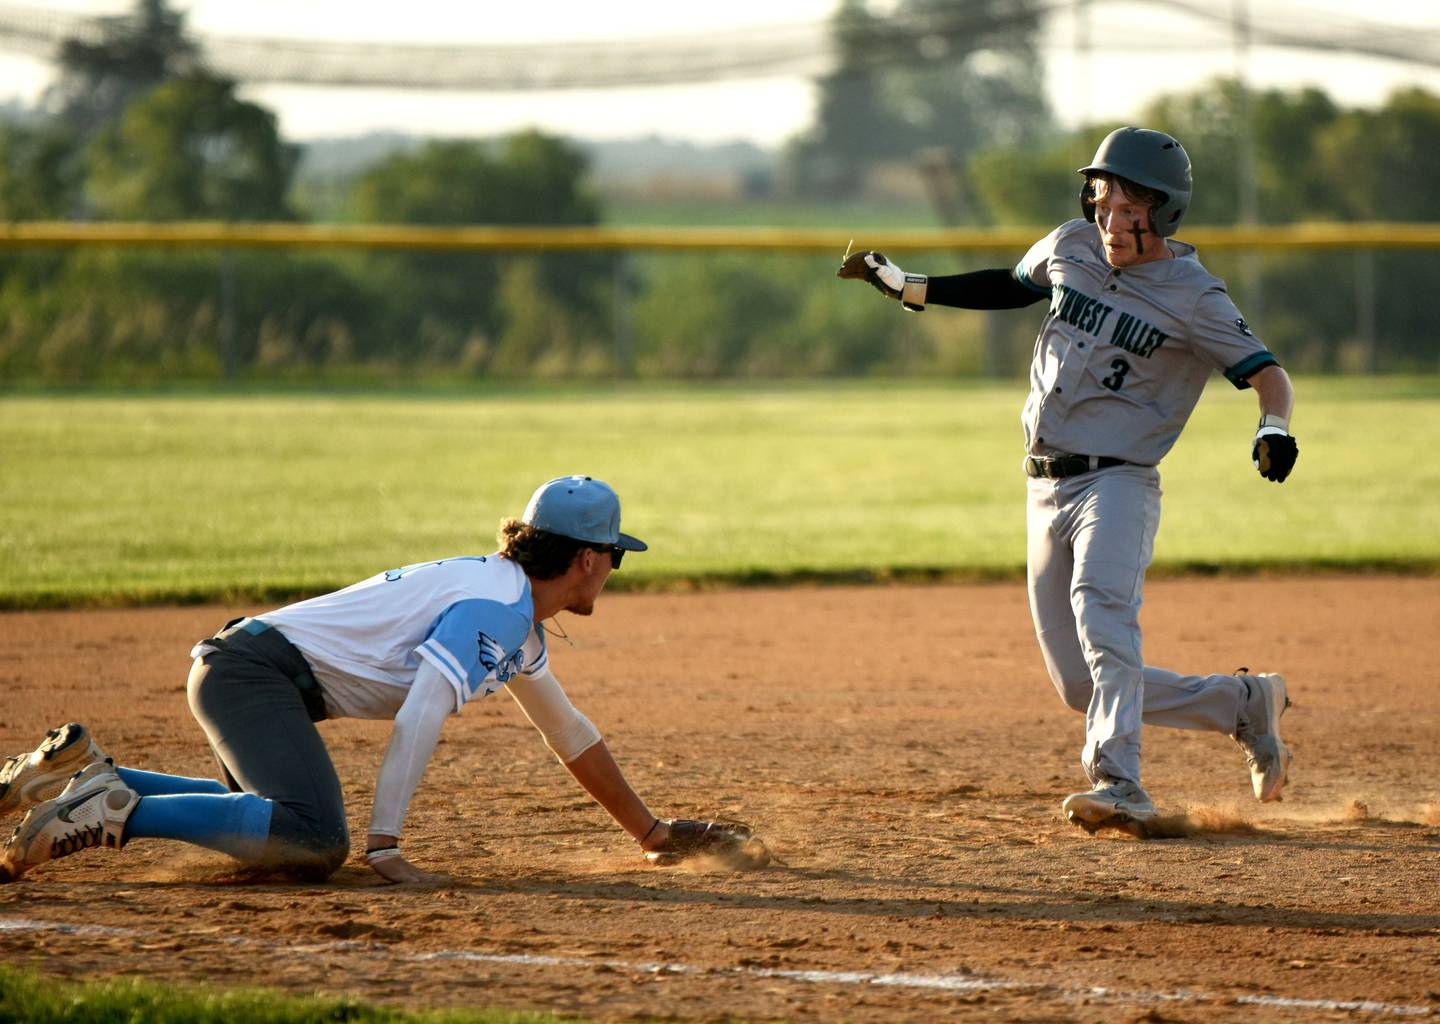 Southwest Valley senior Isaac Currin runs to third while East Union third basemanFischer Buffington dives for the ball.